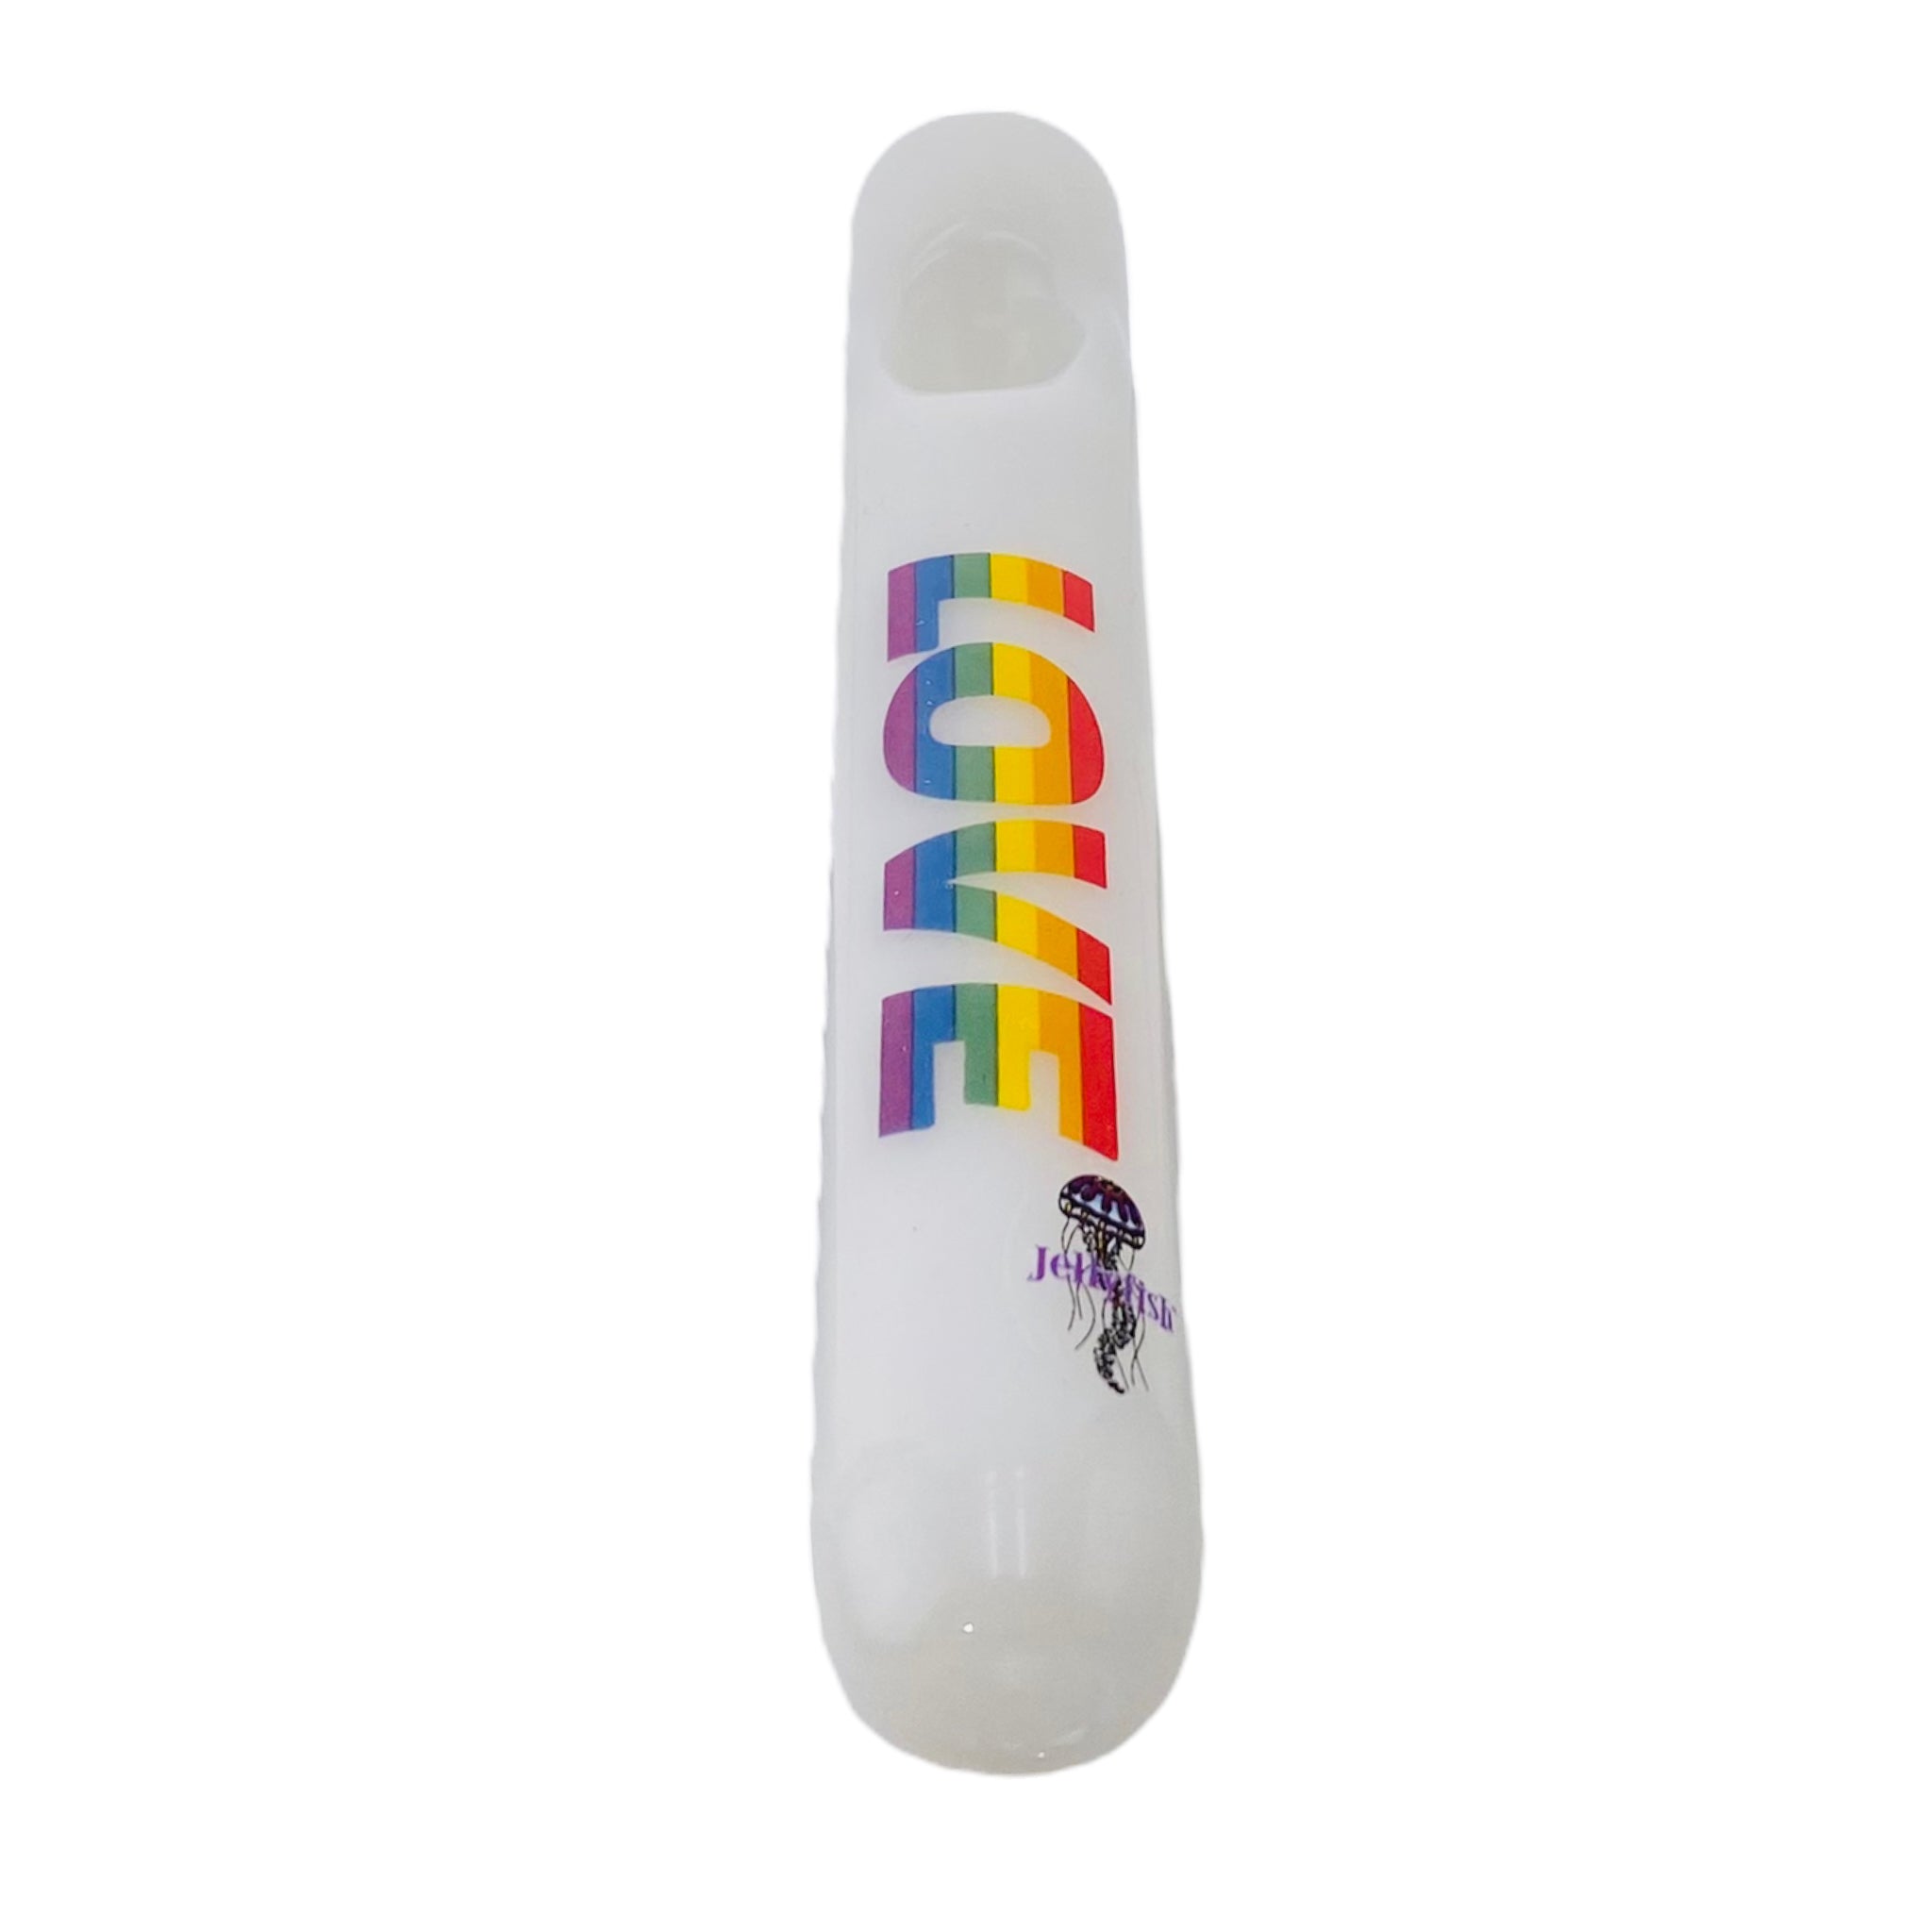 White Glass Steamroller With Rainbow Love